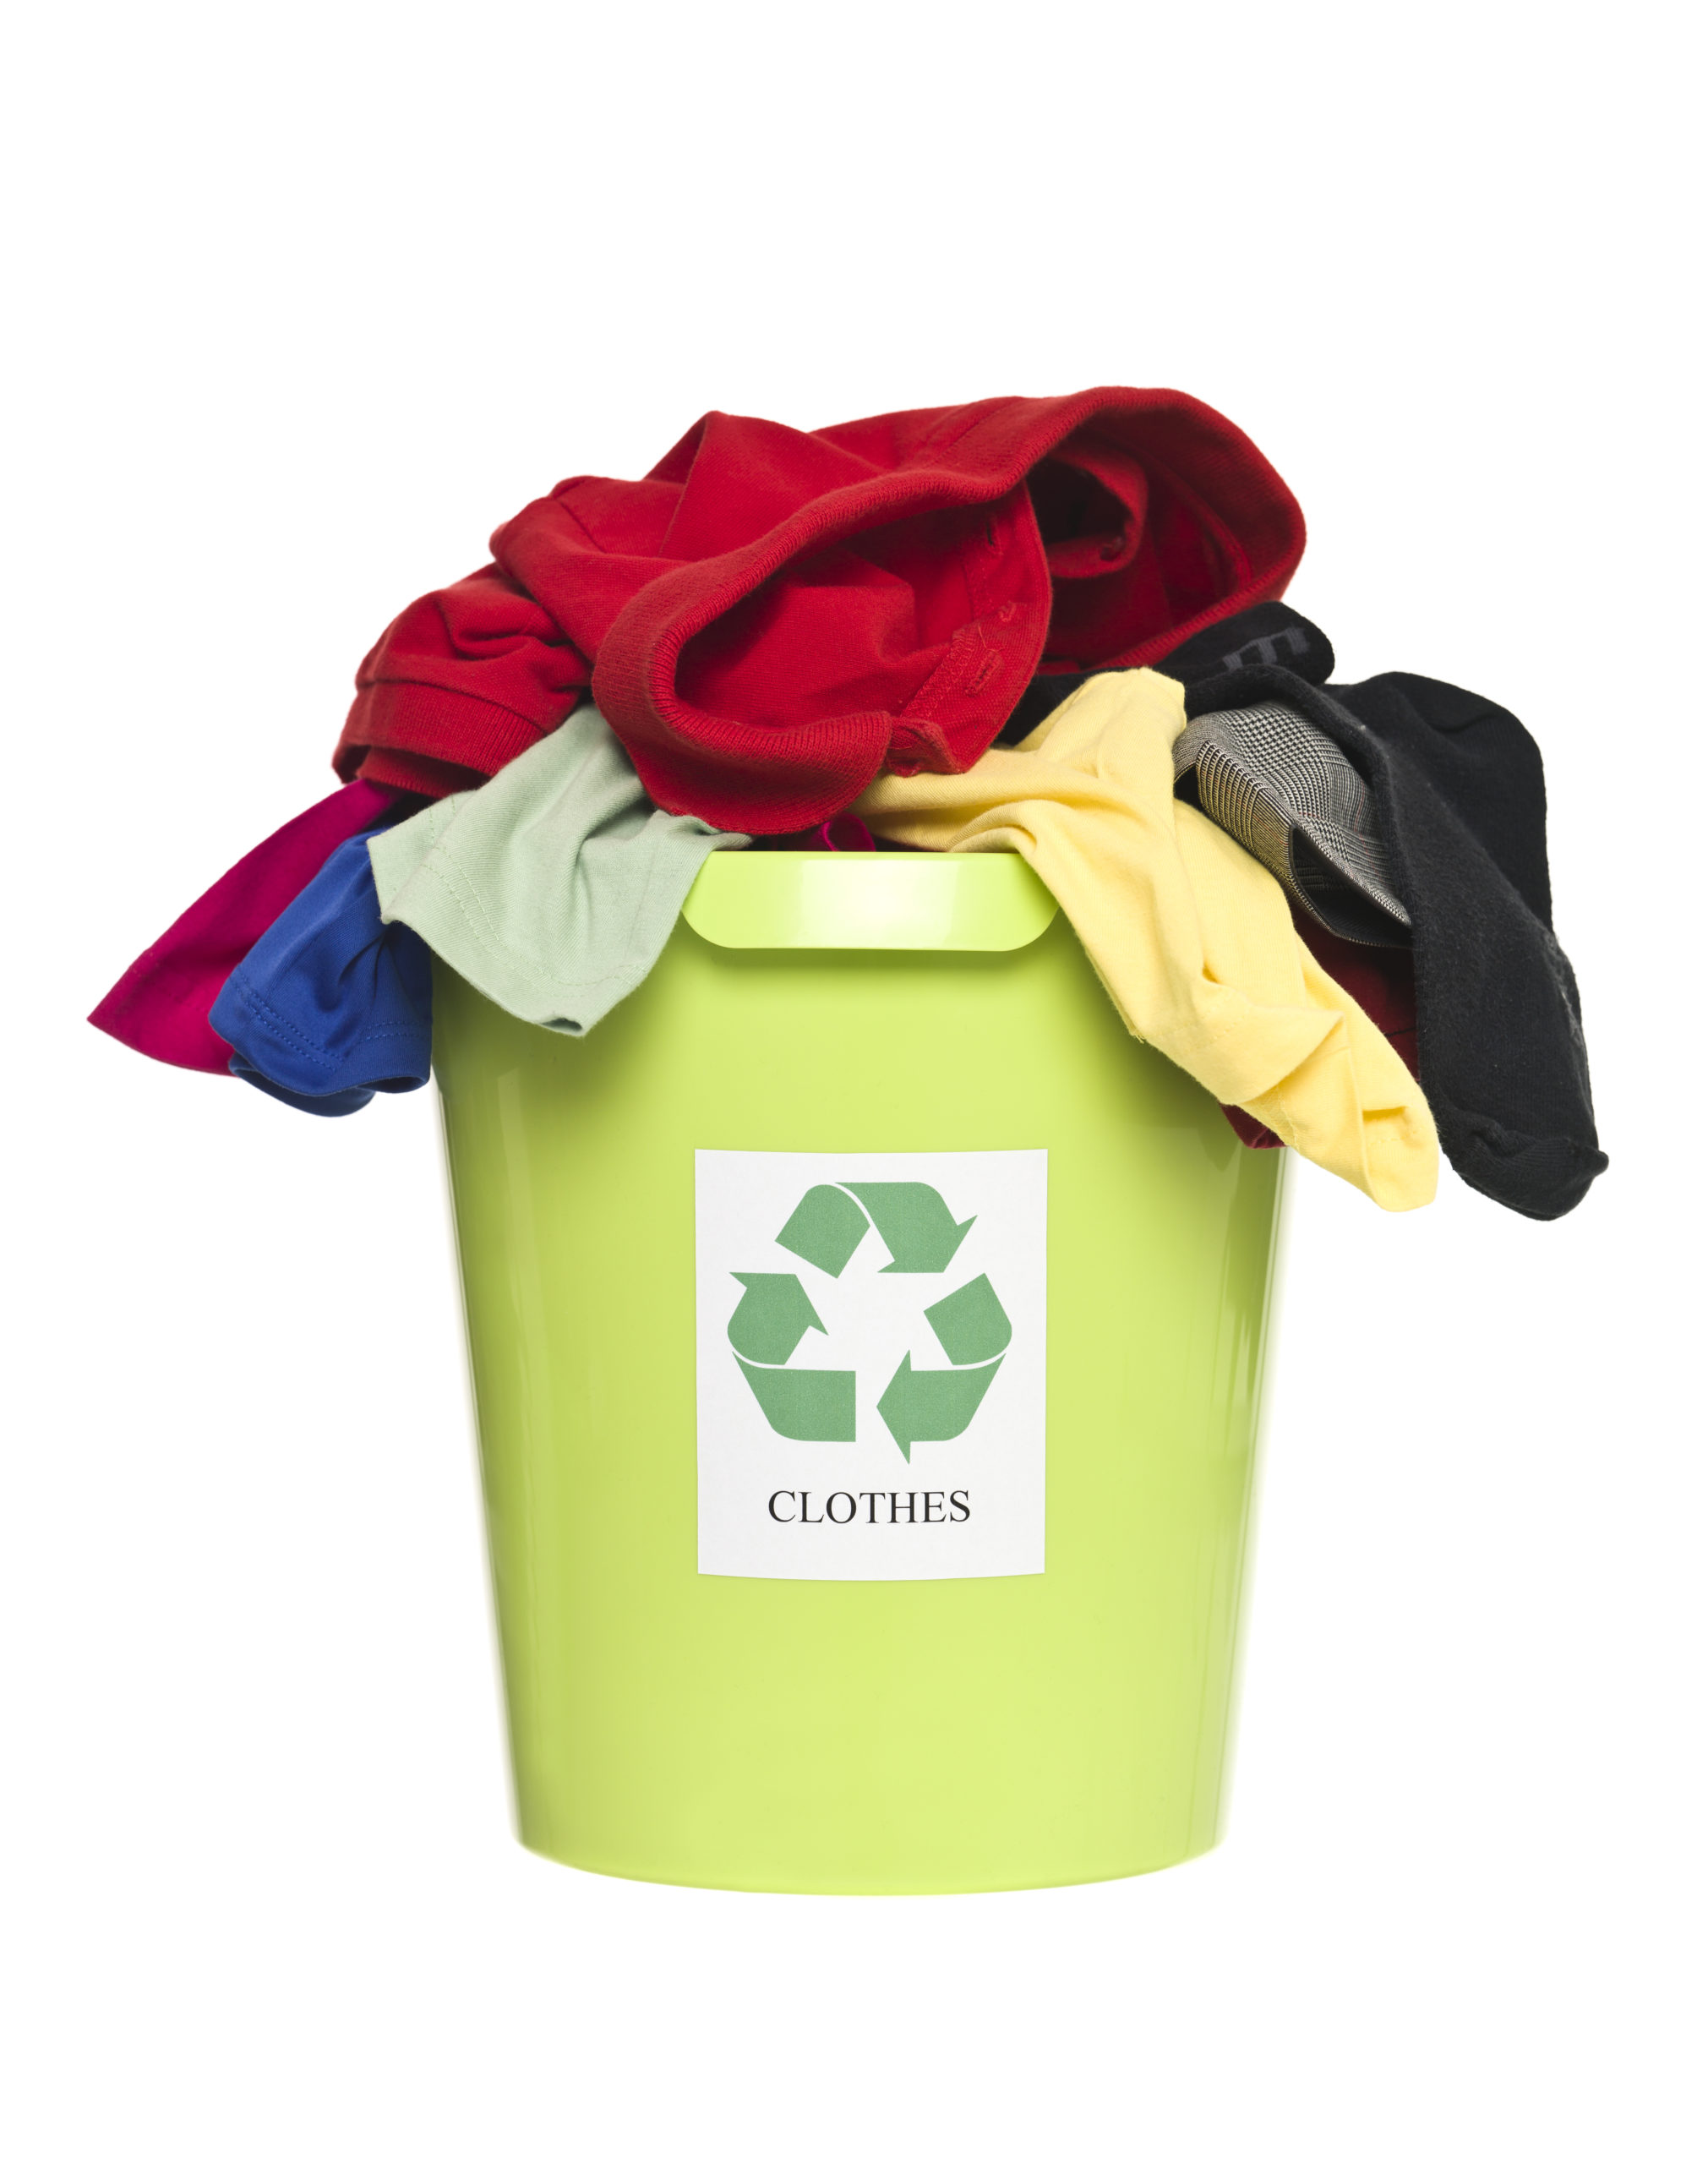 What to Do with Old Clothes - Where to Recycle Underwear & more